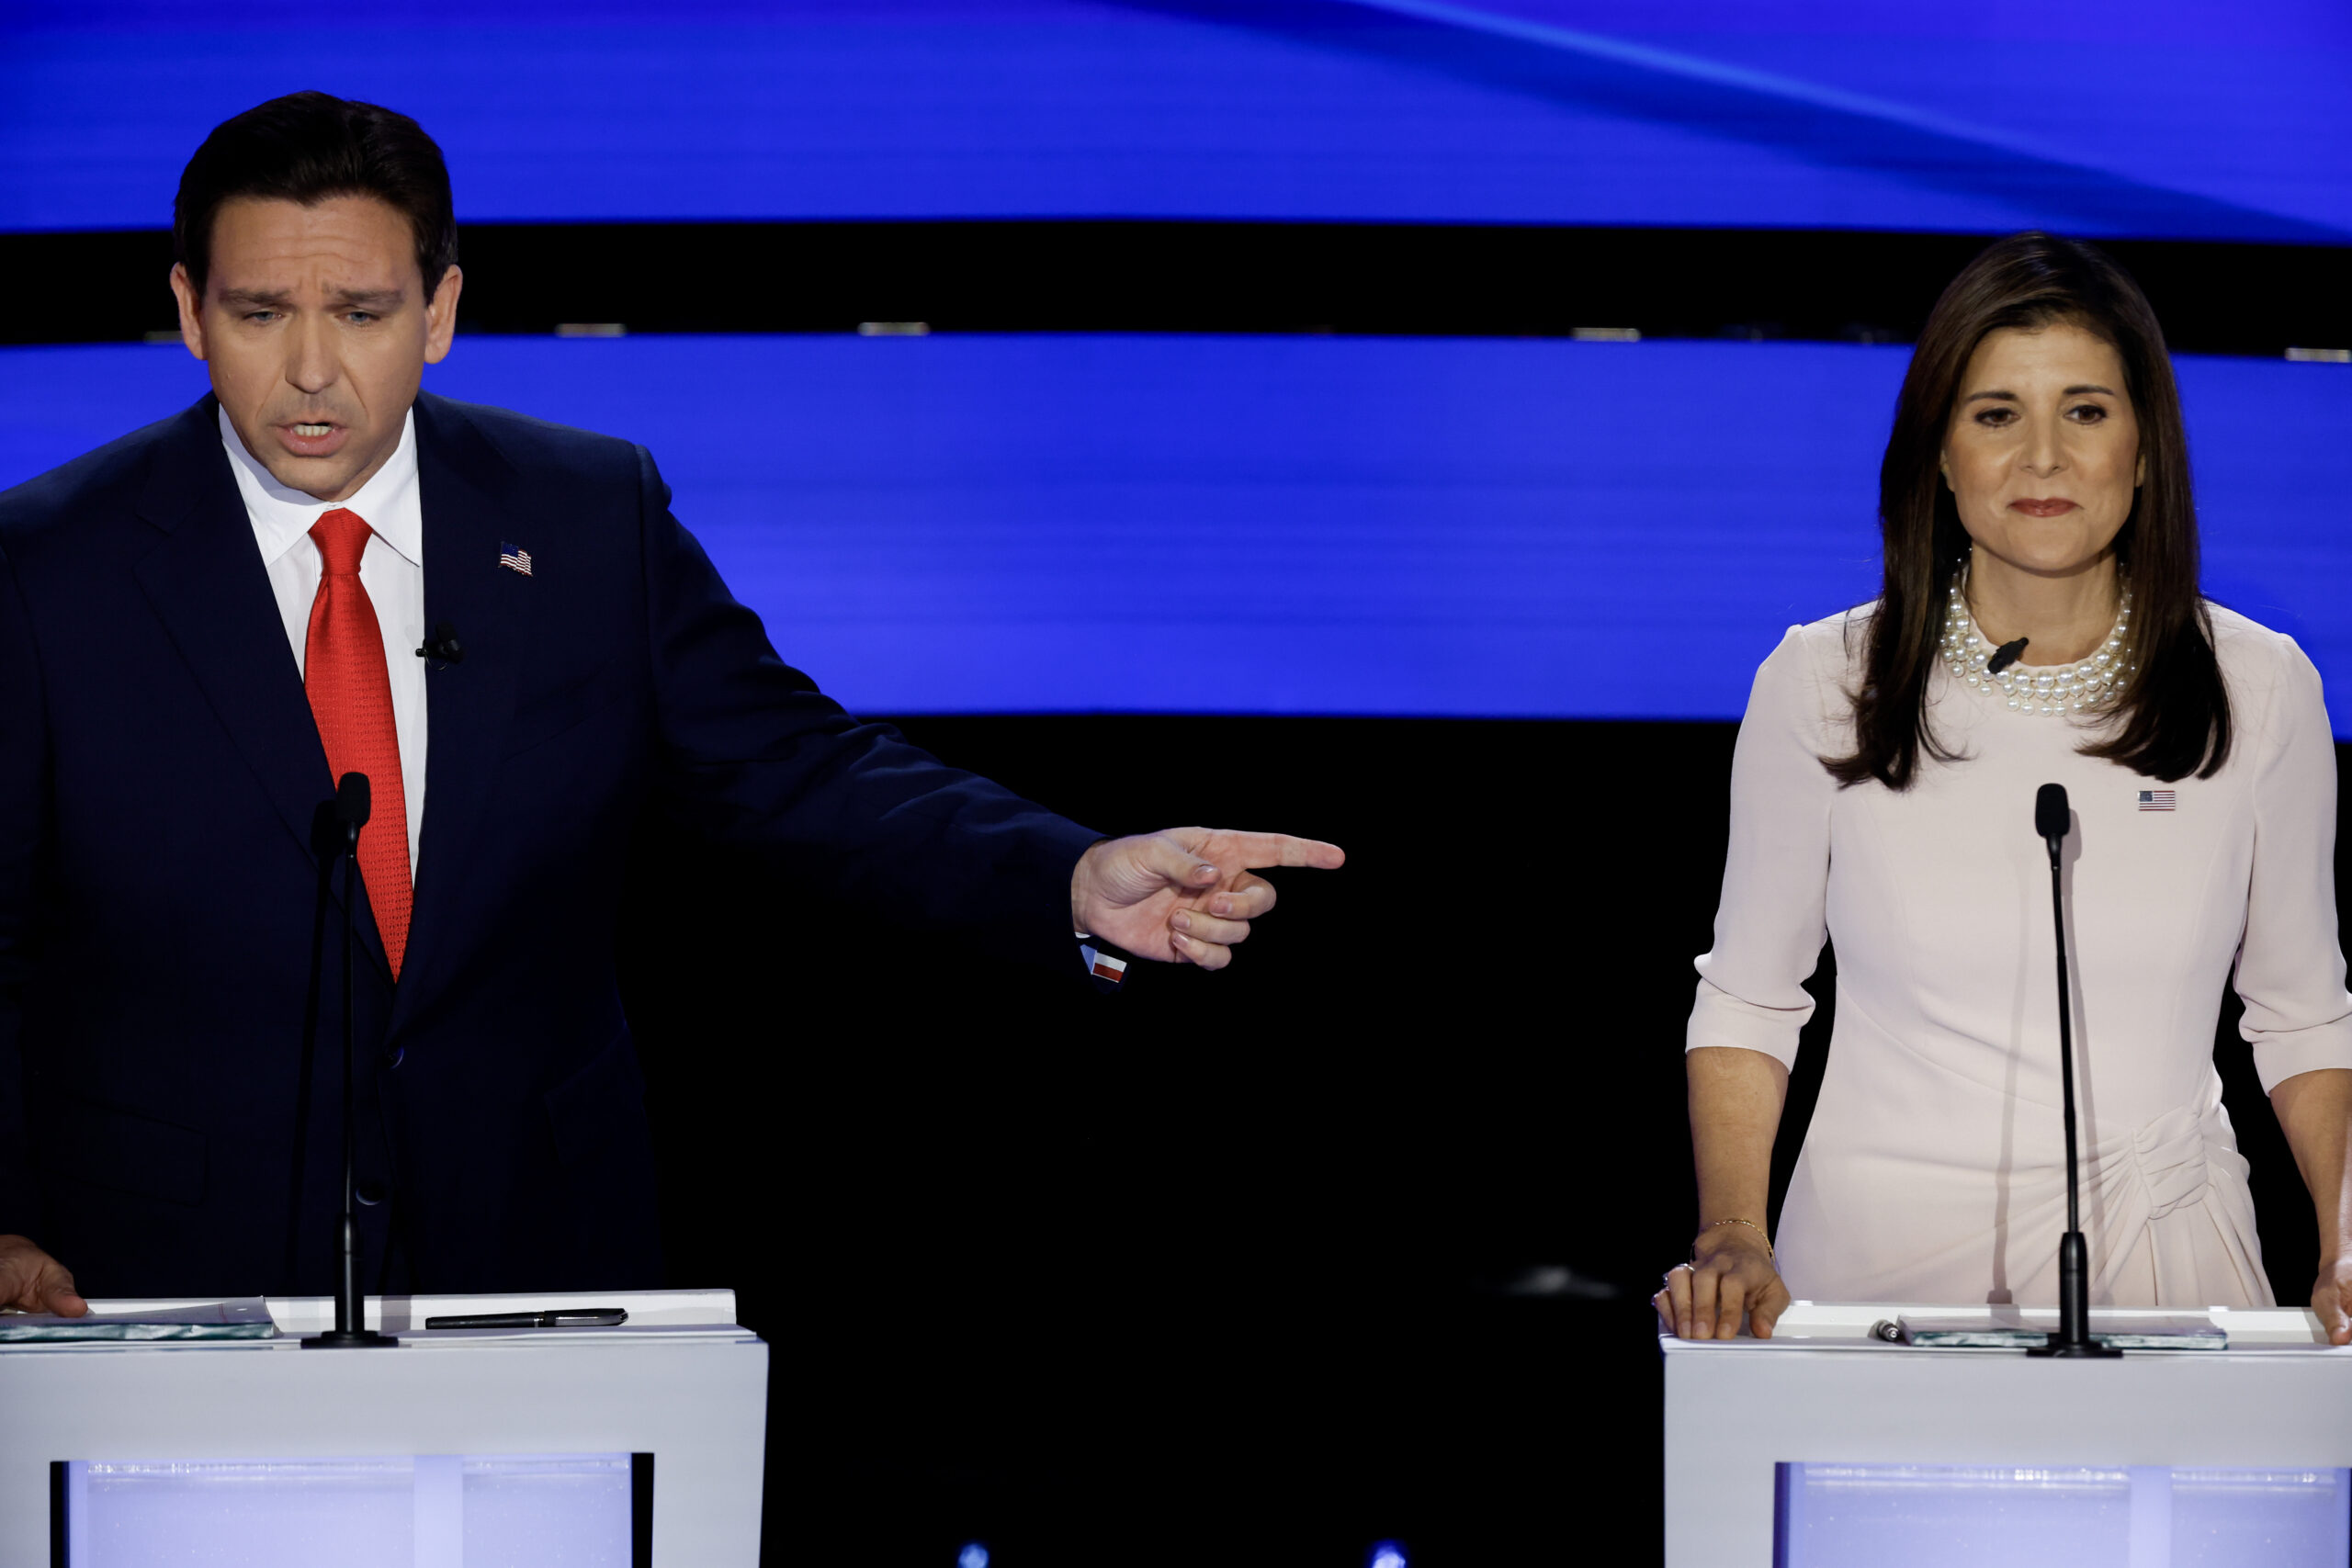 DeSantis and Haley trade accusations at Iowa debate while Trump holds separate town hall